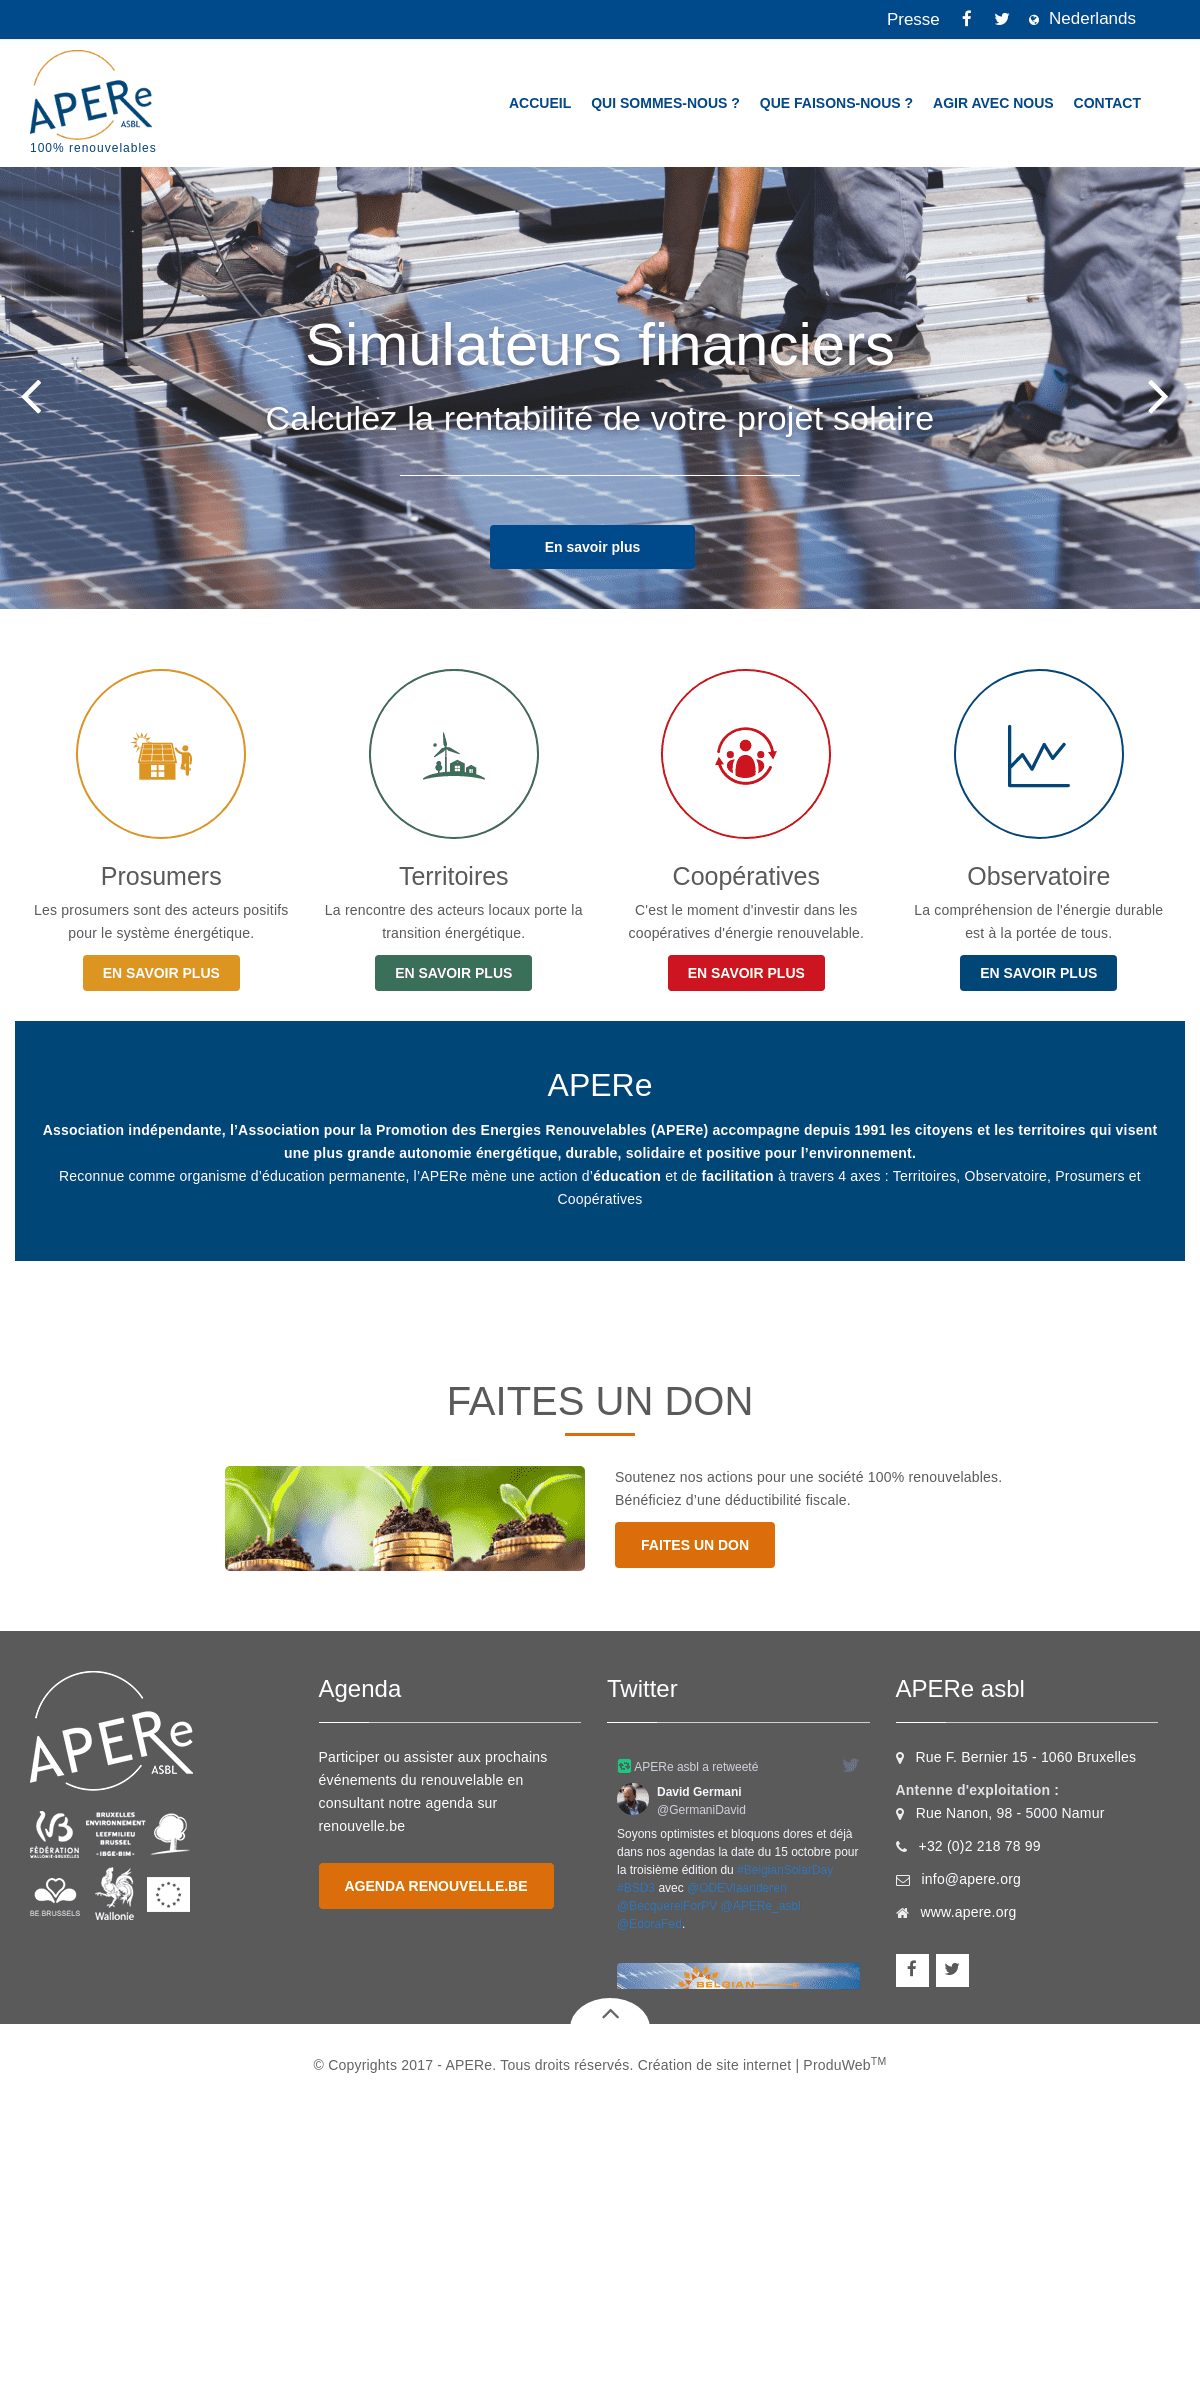 A complete backup of apere.org